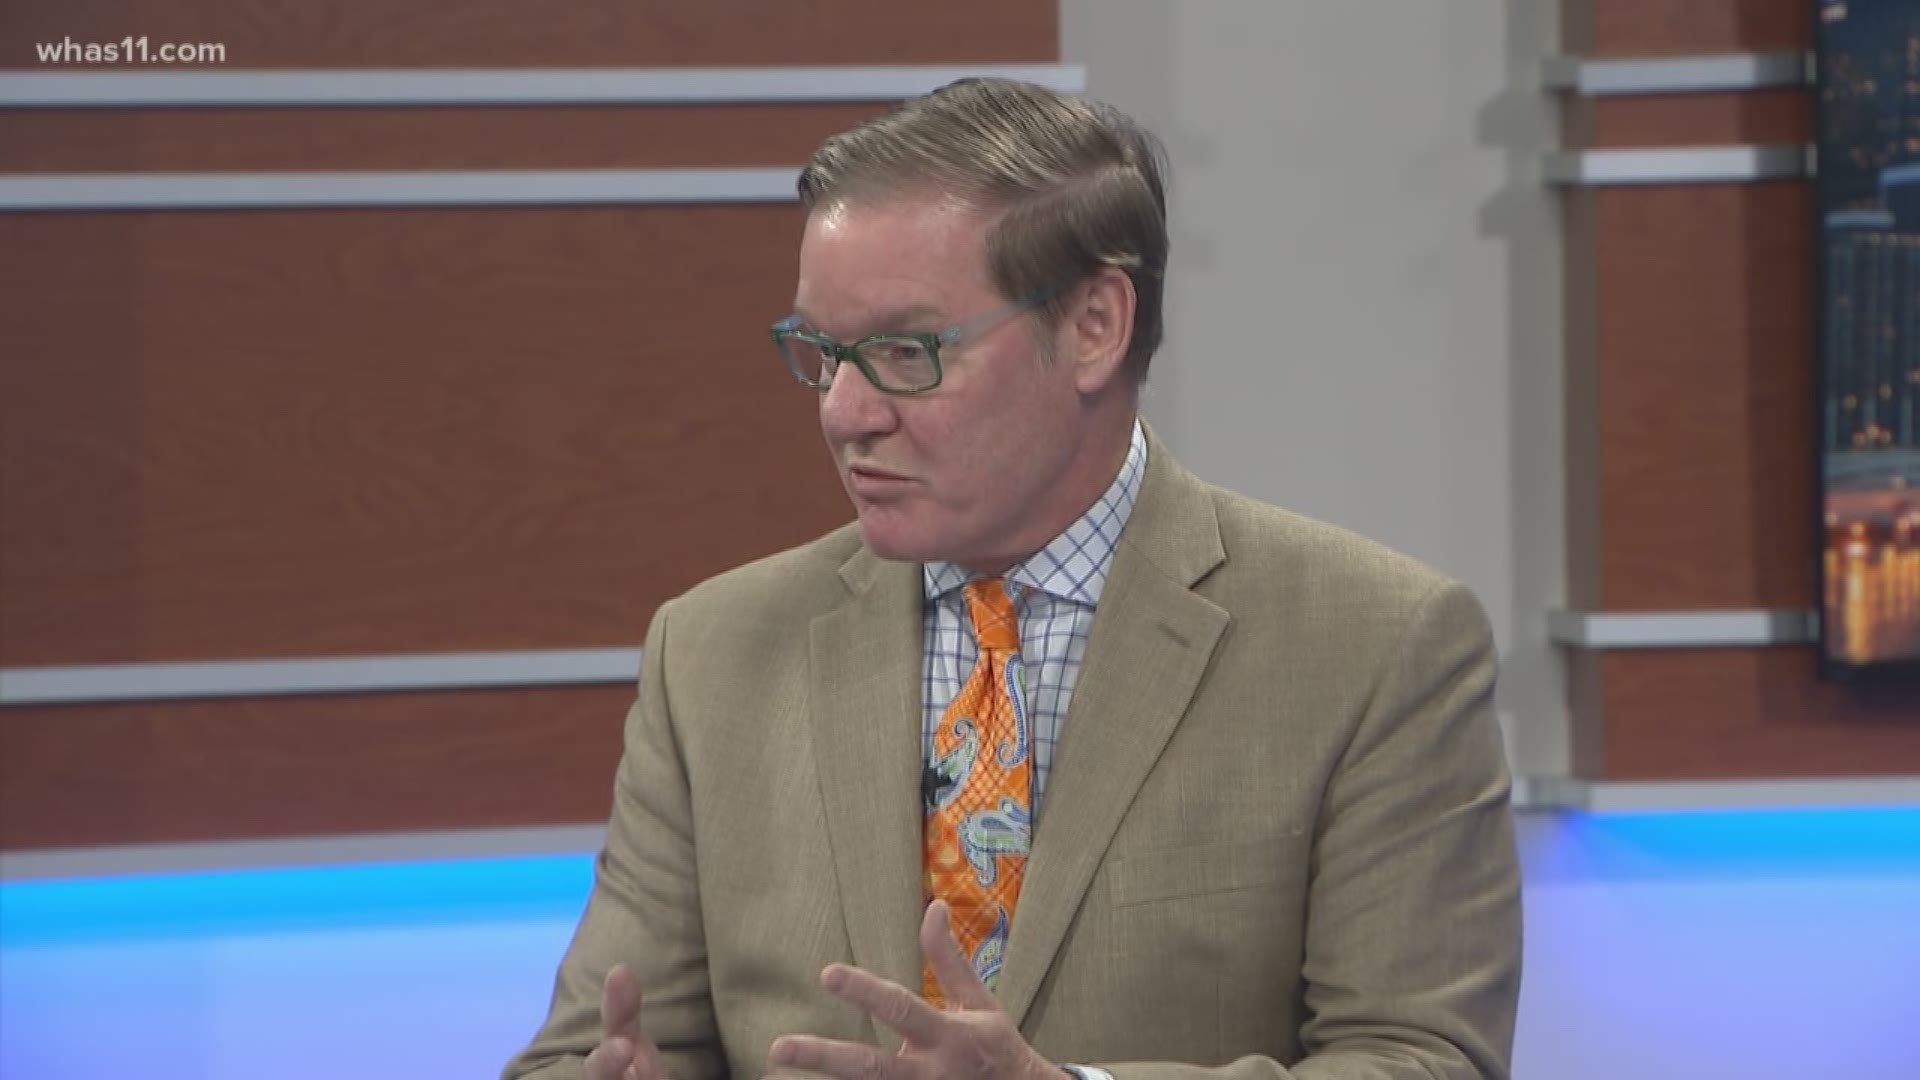 Interim education commissioner Wayne Lewis called a JCPS school a "dungeon." He used those words to describe the interior of the alternative school. Sam Corbett, a former JCPS school board member, discussed this with WHAS11.